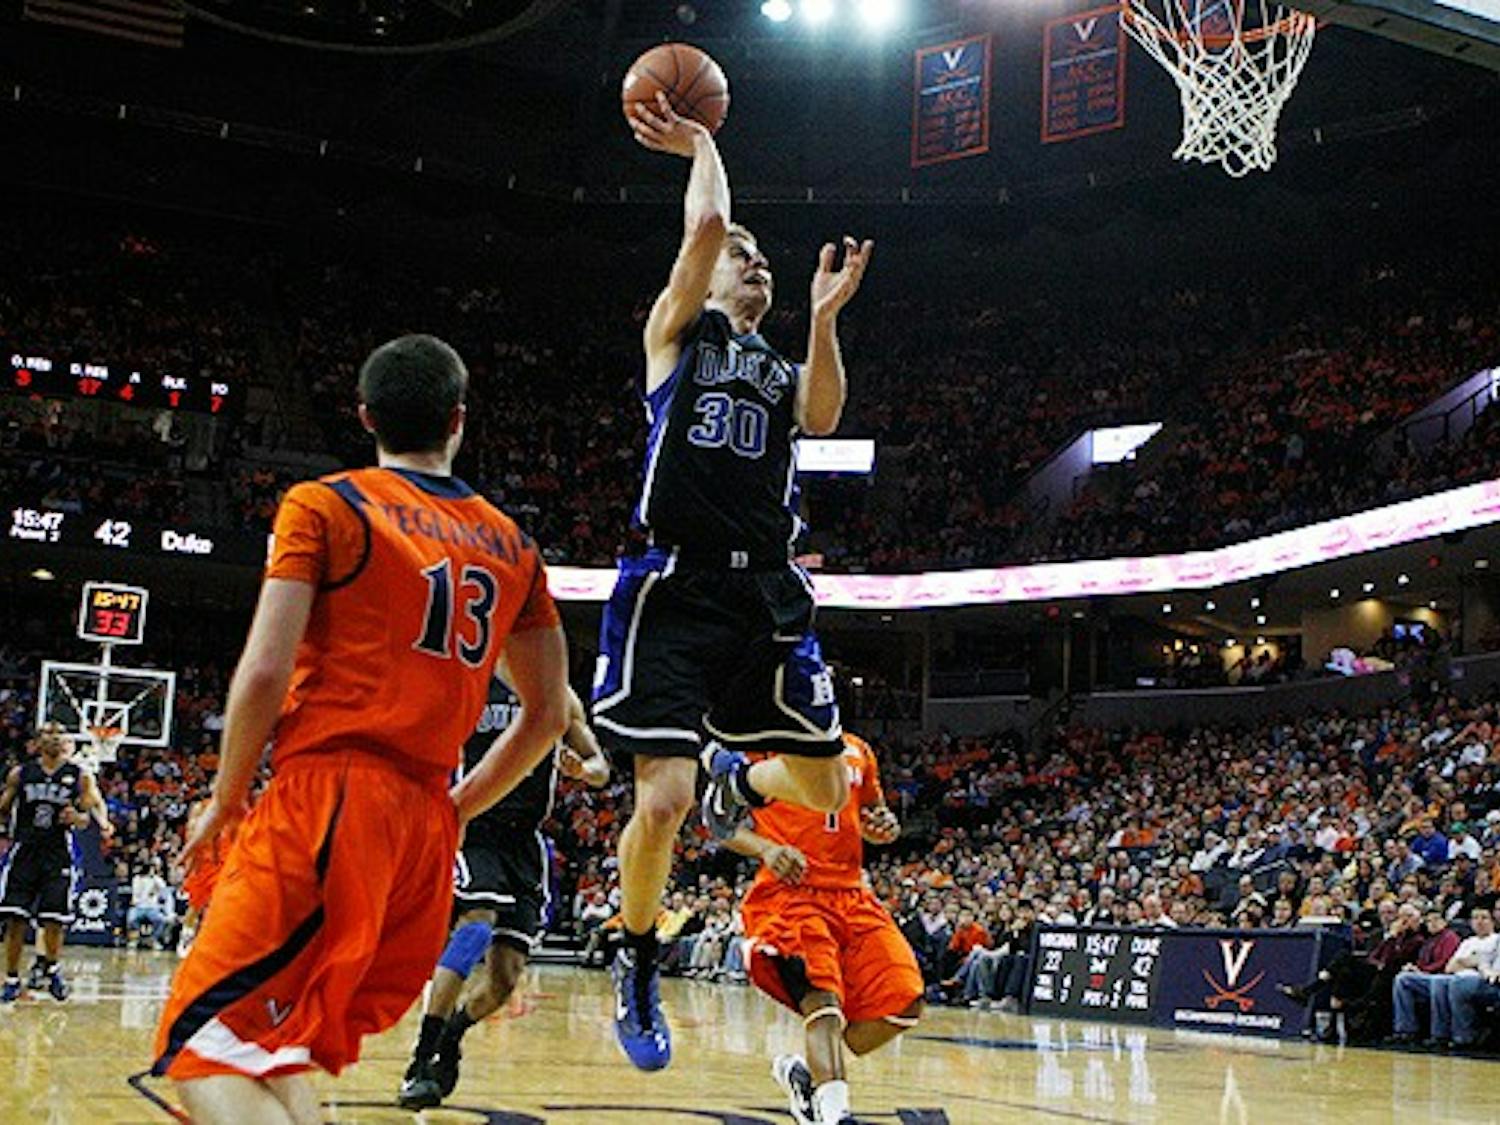 Jon Scheyer erupted for 13 of his 20 total points in the second half against the Cavaliers.